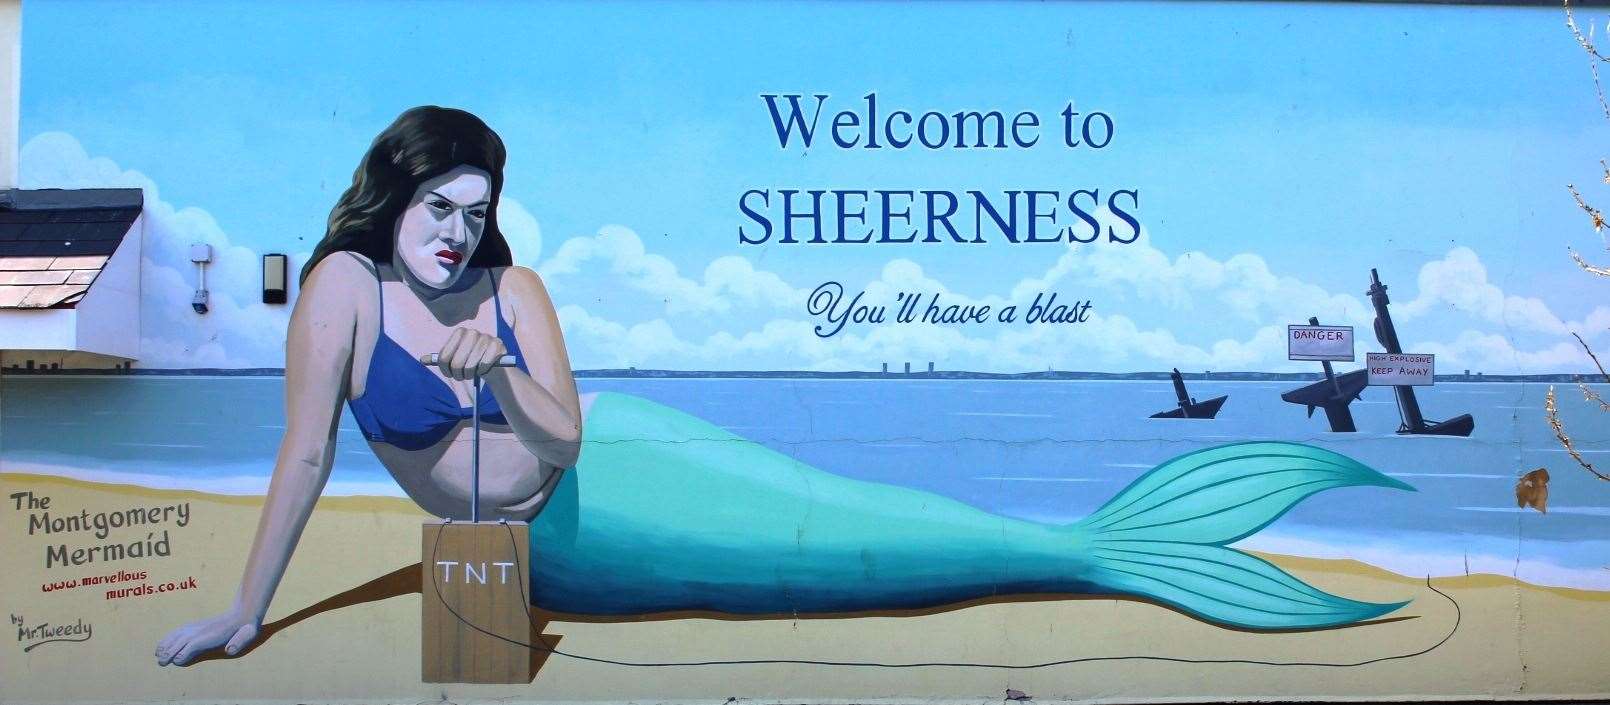 Artist Dean Tweedy left no one in doubt what he thought should be done to the wreck of the Richard Montgomery bomb ship when he painted this moody mermaid mural at Sheerness